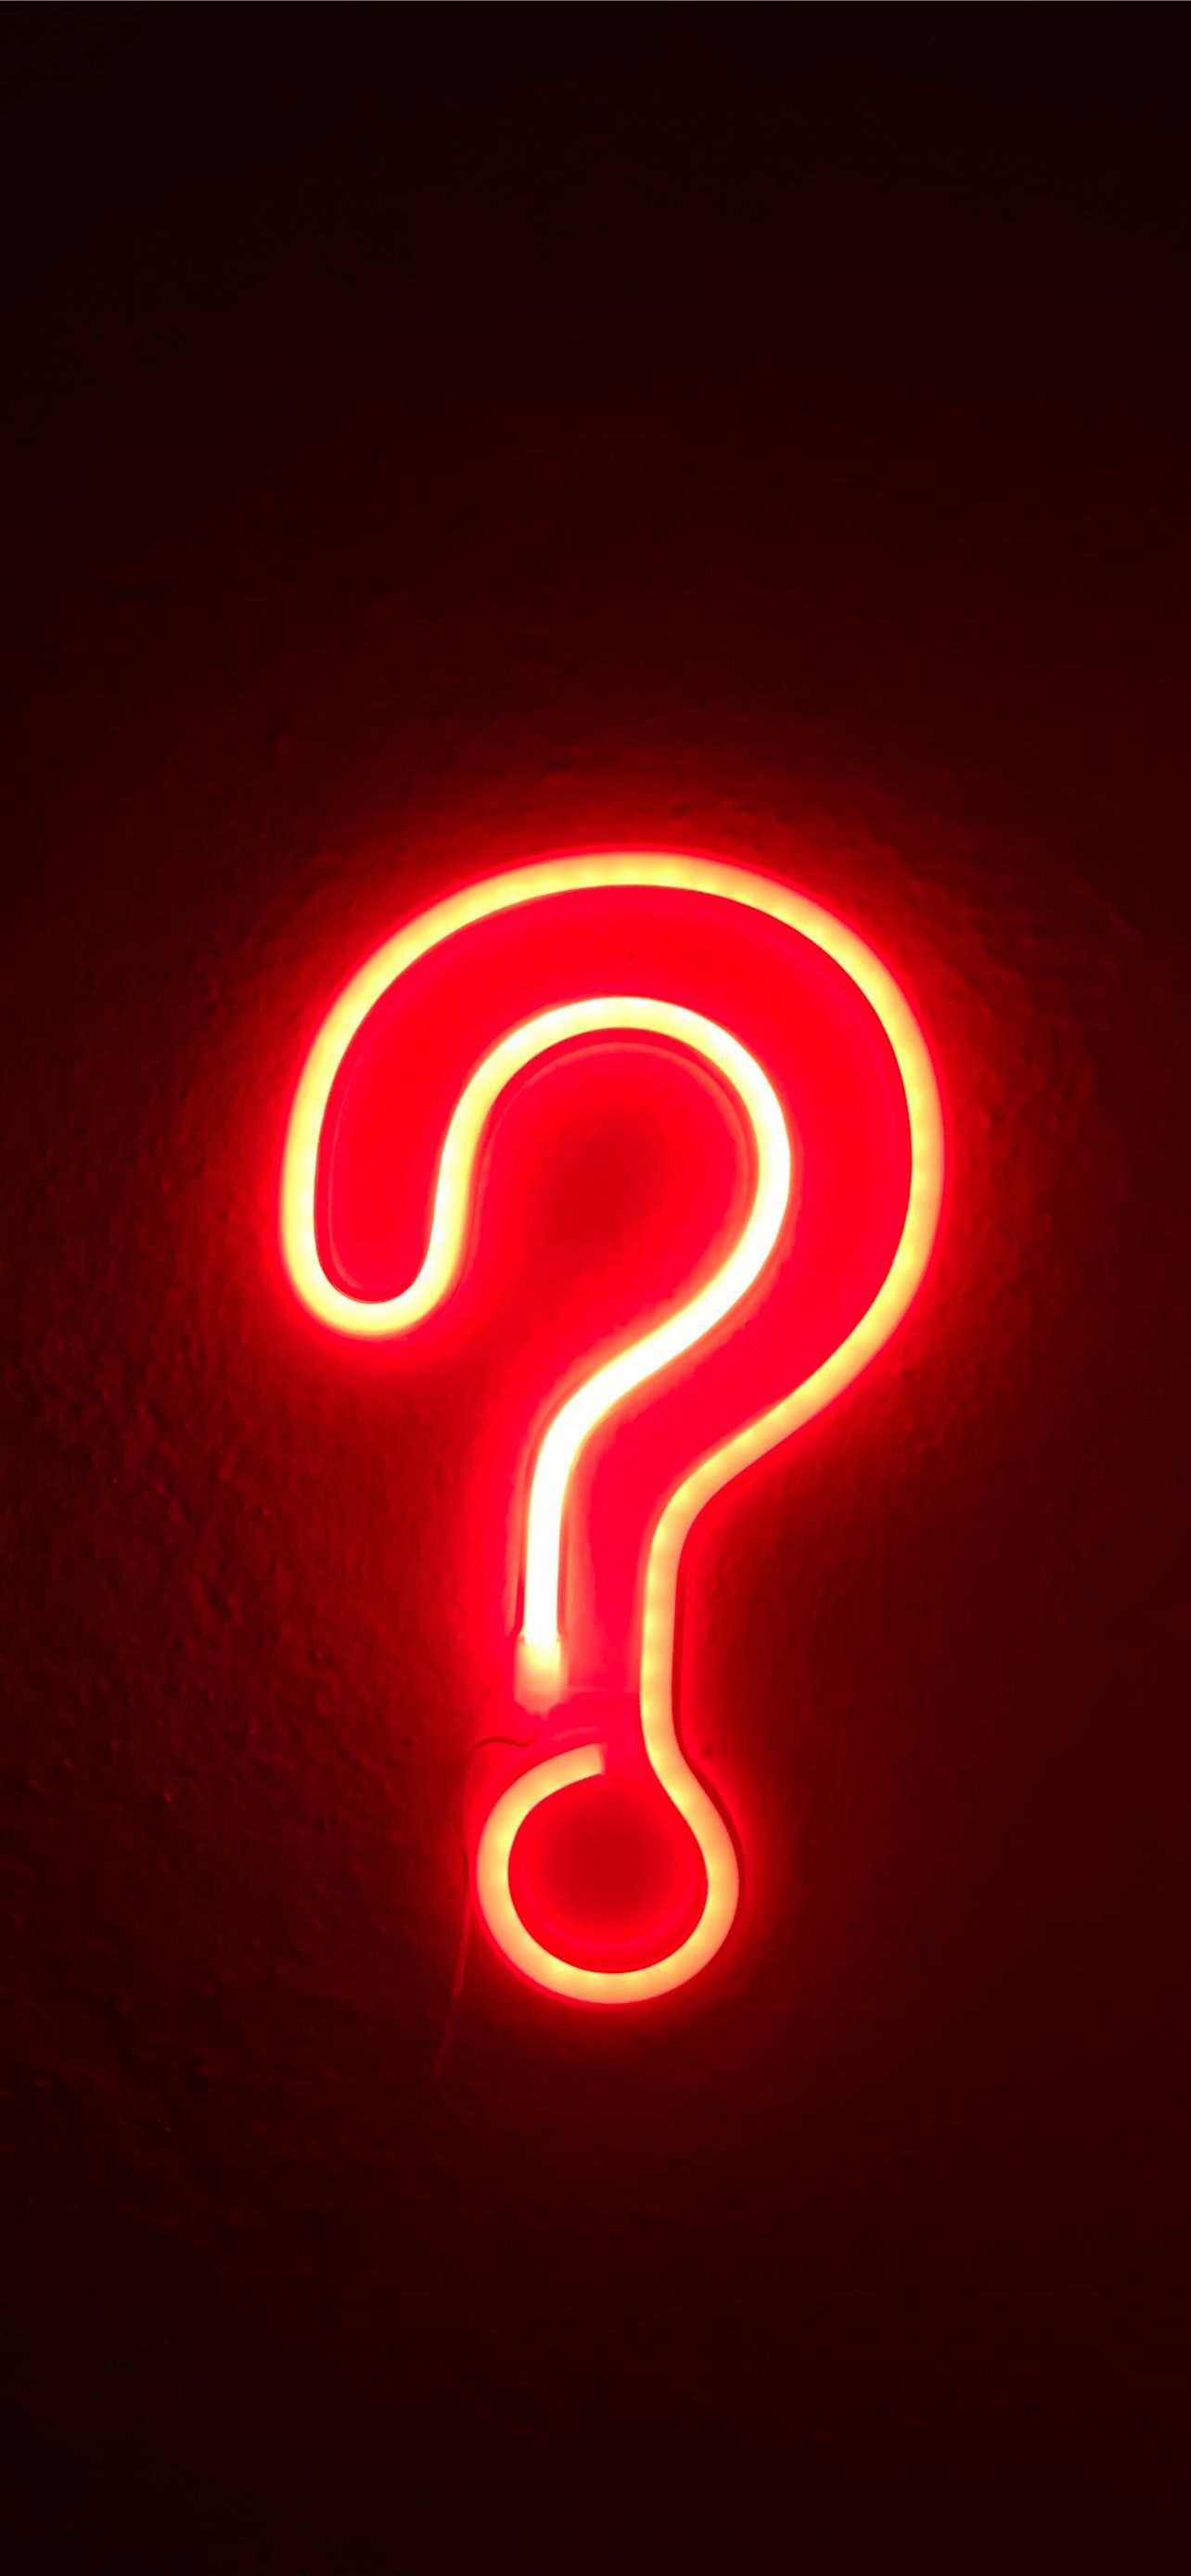 A red neon sign in the shape of a question mark. - Neon orange, iPhone red, light red, neon red